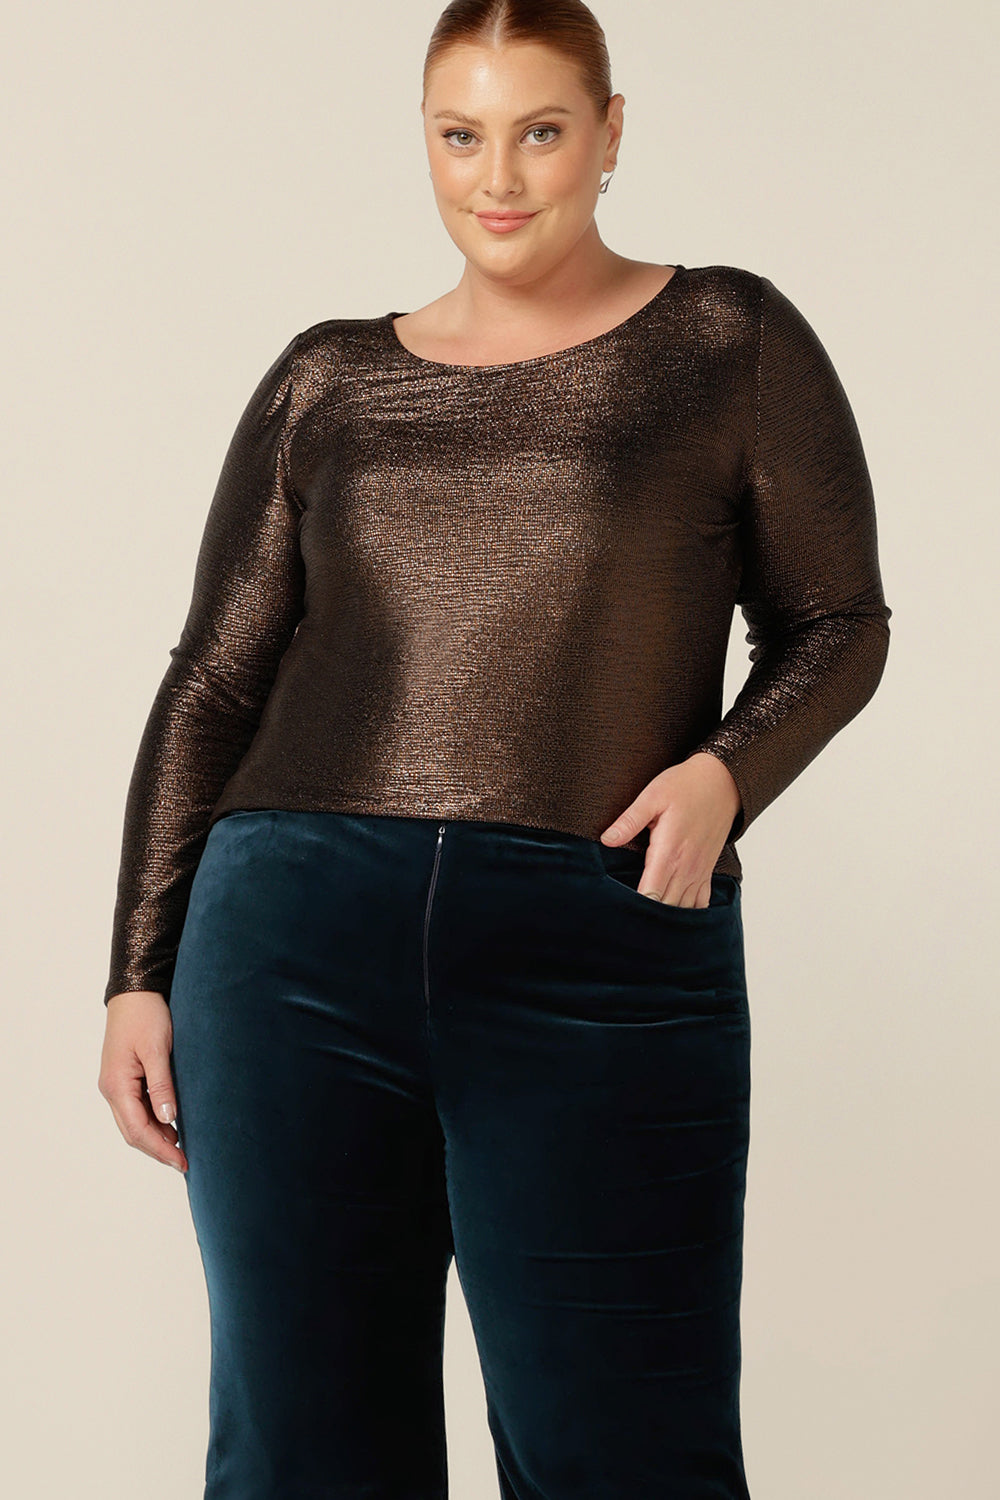  Look good in long sleeved eveningwear with this sparkly top by Australian and New Zealand women's clothing brand, L&F. With a high scoop neck and long sleeves, this shimmering stretch jersey top in Mocha brown offers stylish after 5 wear for petite to plus size women and fashionable 40 plus women. Shop Stylish evening tops now!